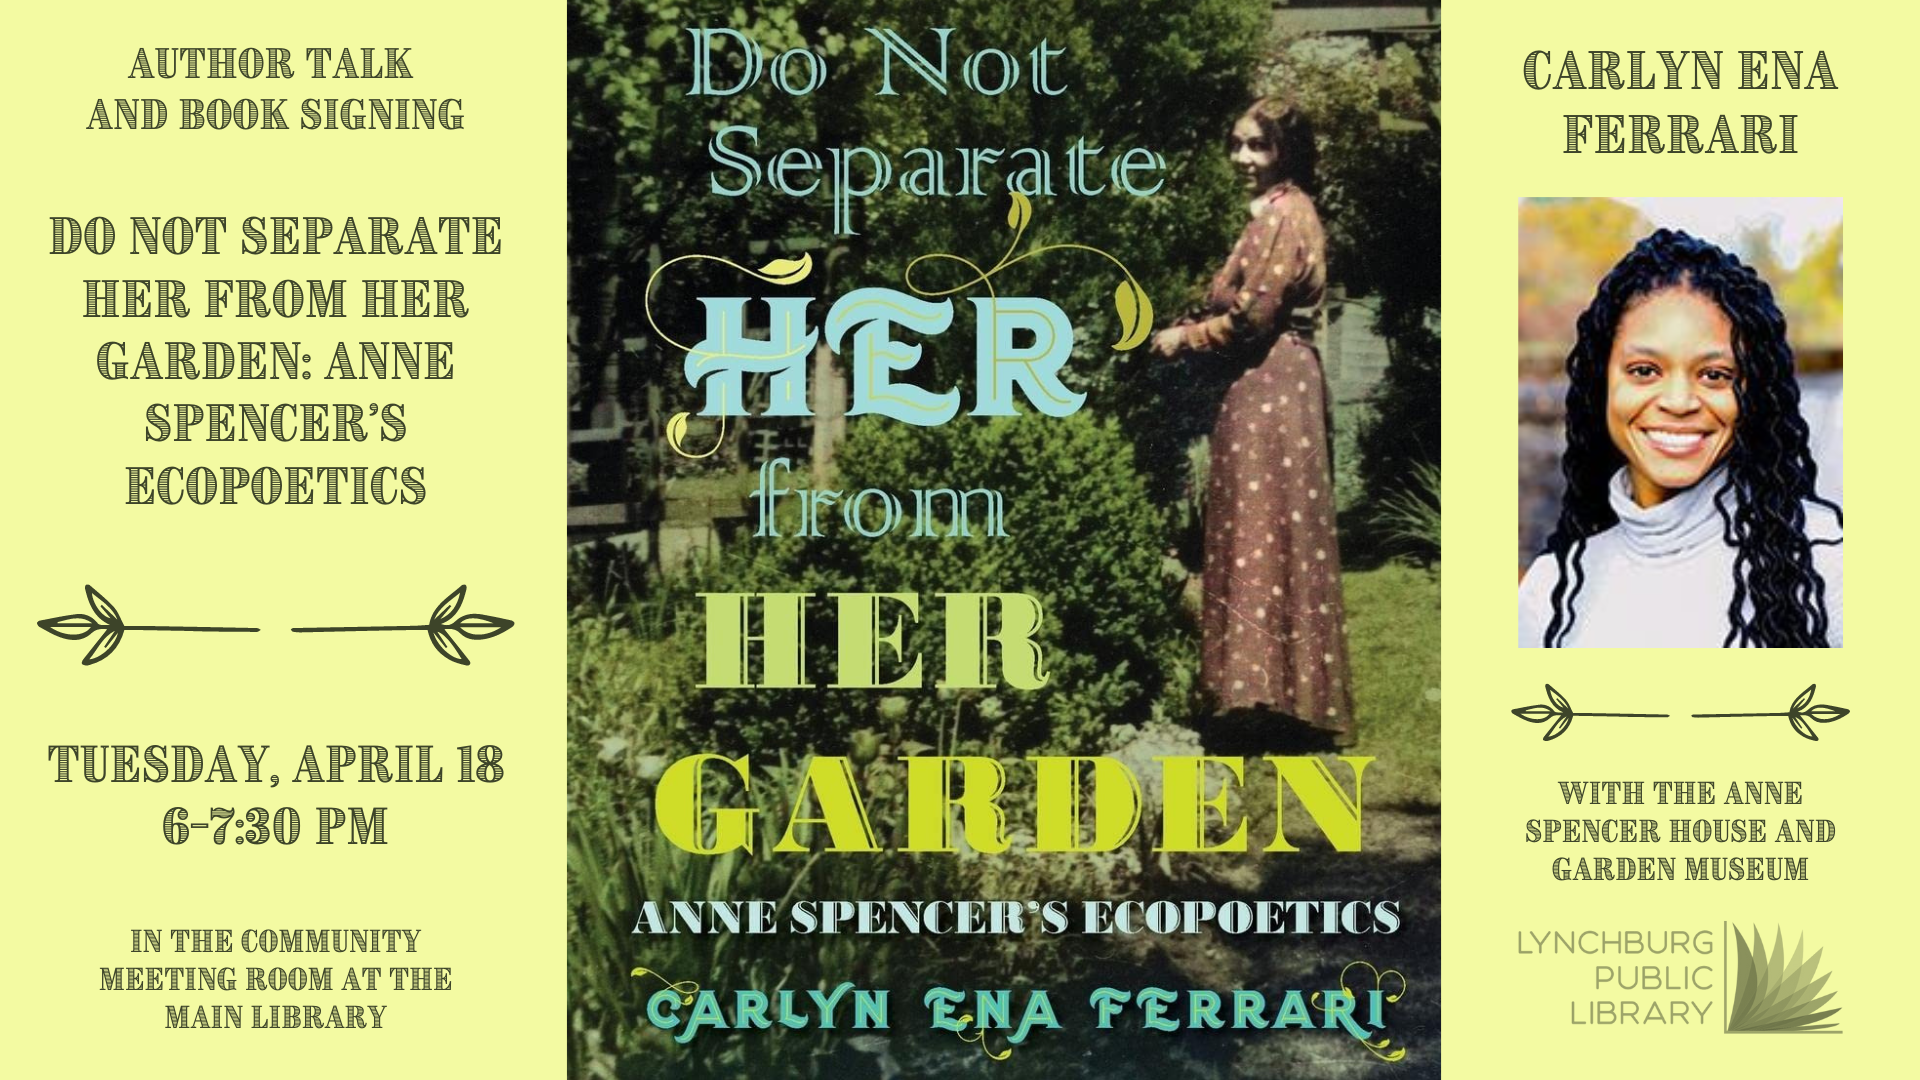 author talk and book signing; do not separate her from her garden: anne spencer's ecopoetics; tuesday, april 18th, 6-7:30 pm, in the community meeting room at the main library; carlyn ferrari with the anne spencer house and garden museum